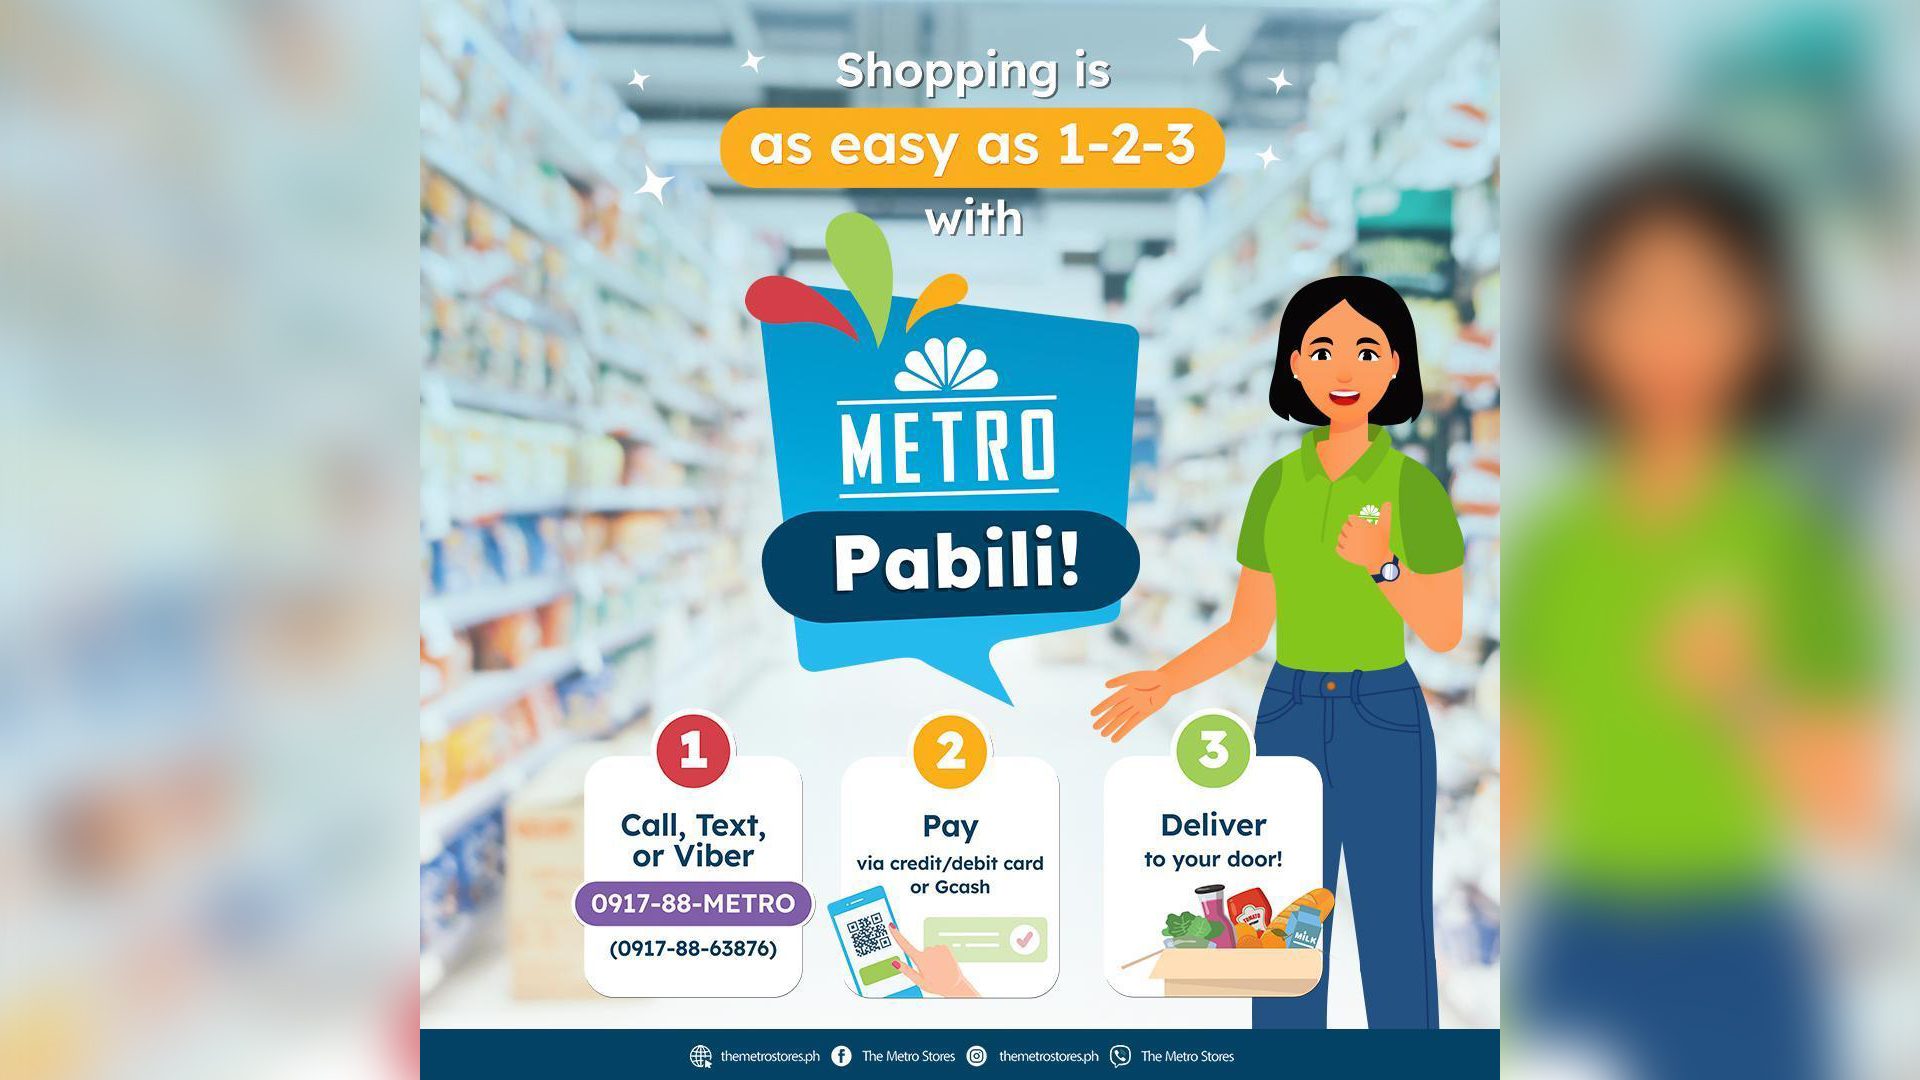 Shop from home with The Metro Store’s ‘Metro Pabili’